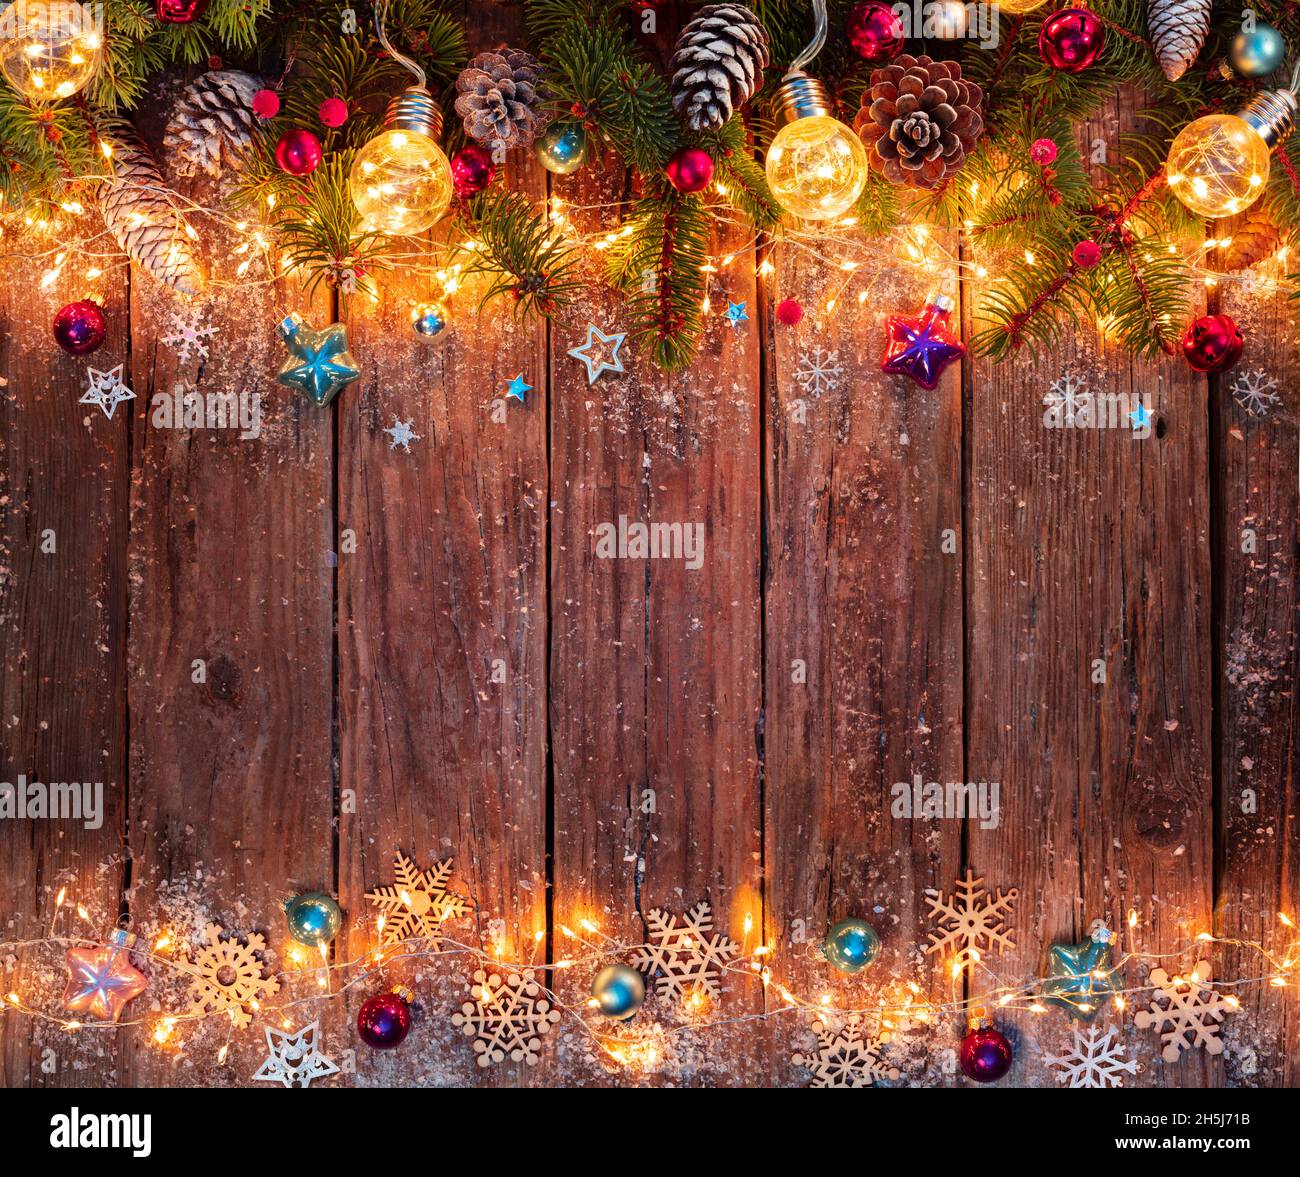 Christmas - Decoration On Wooden Illuminated With Lights With Fir Branches And Ornaments Stock Photo